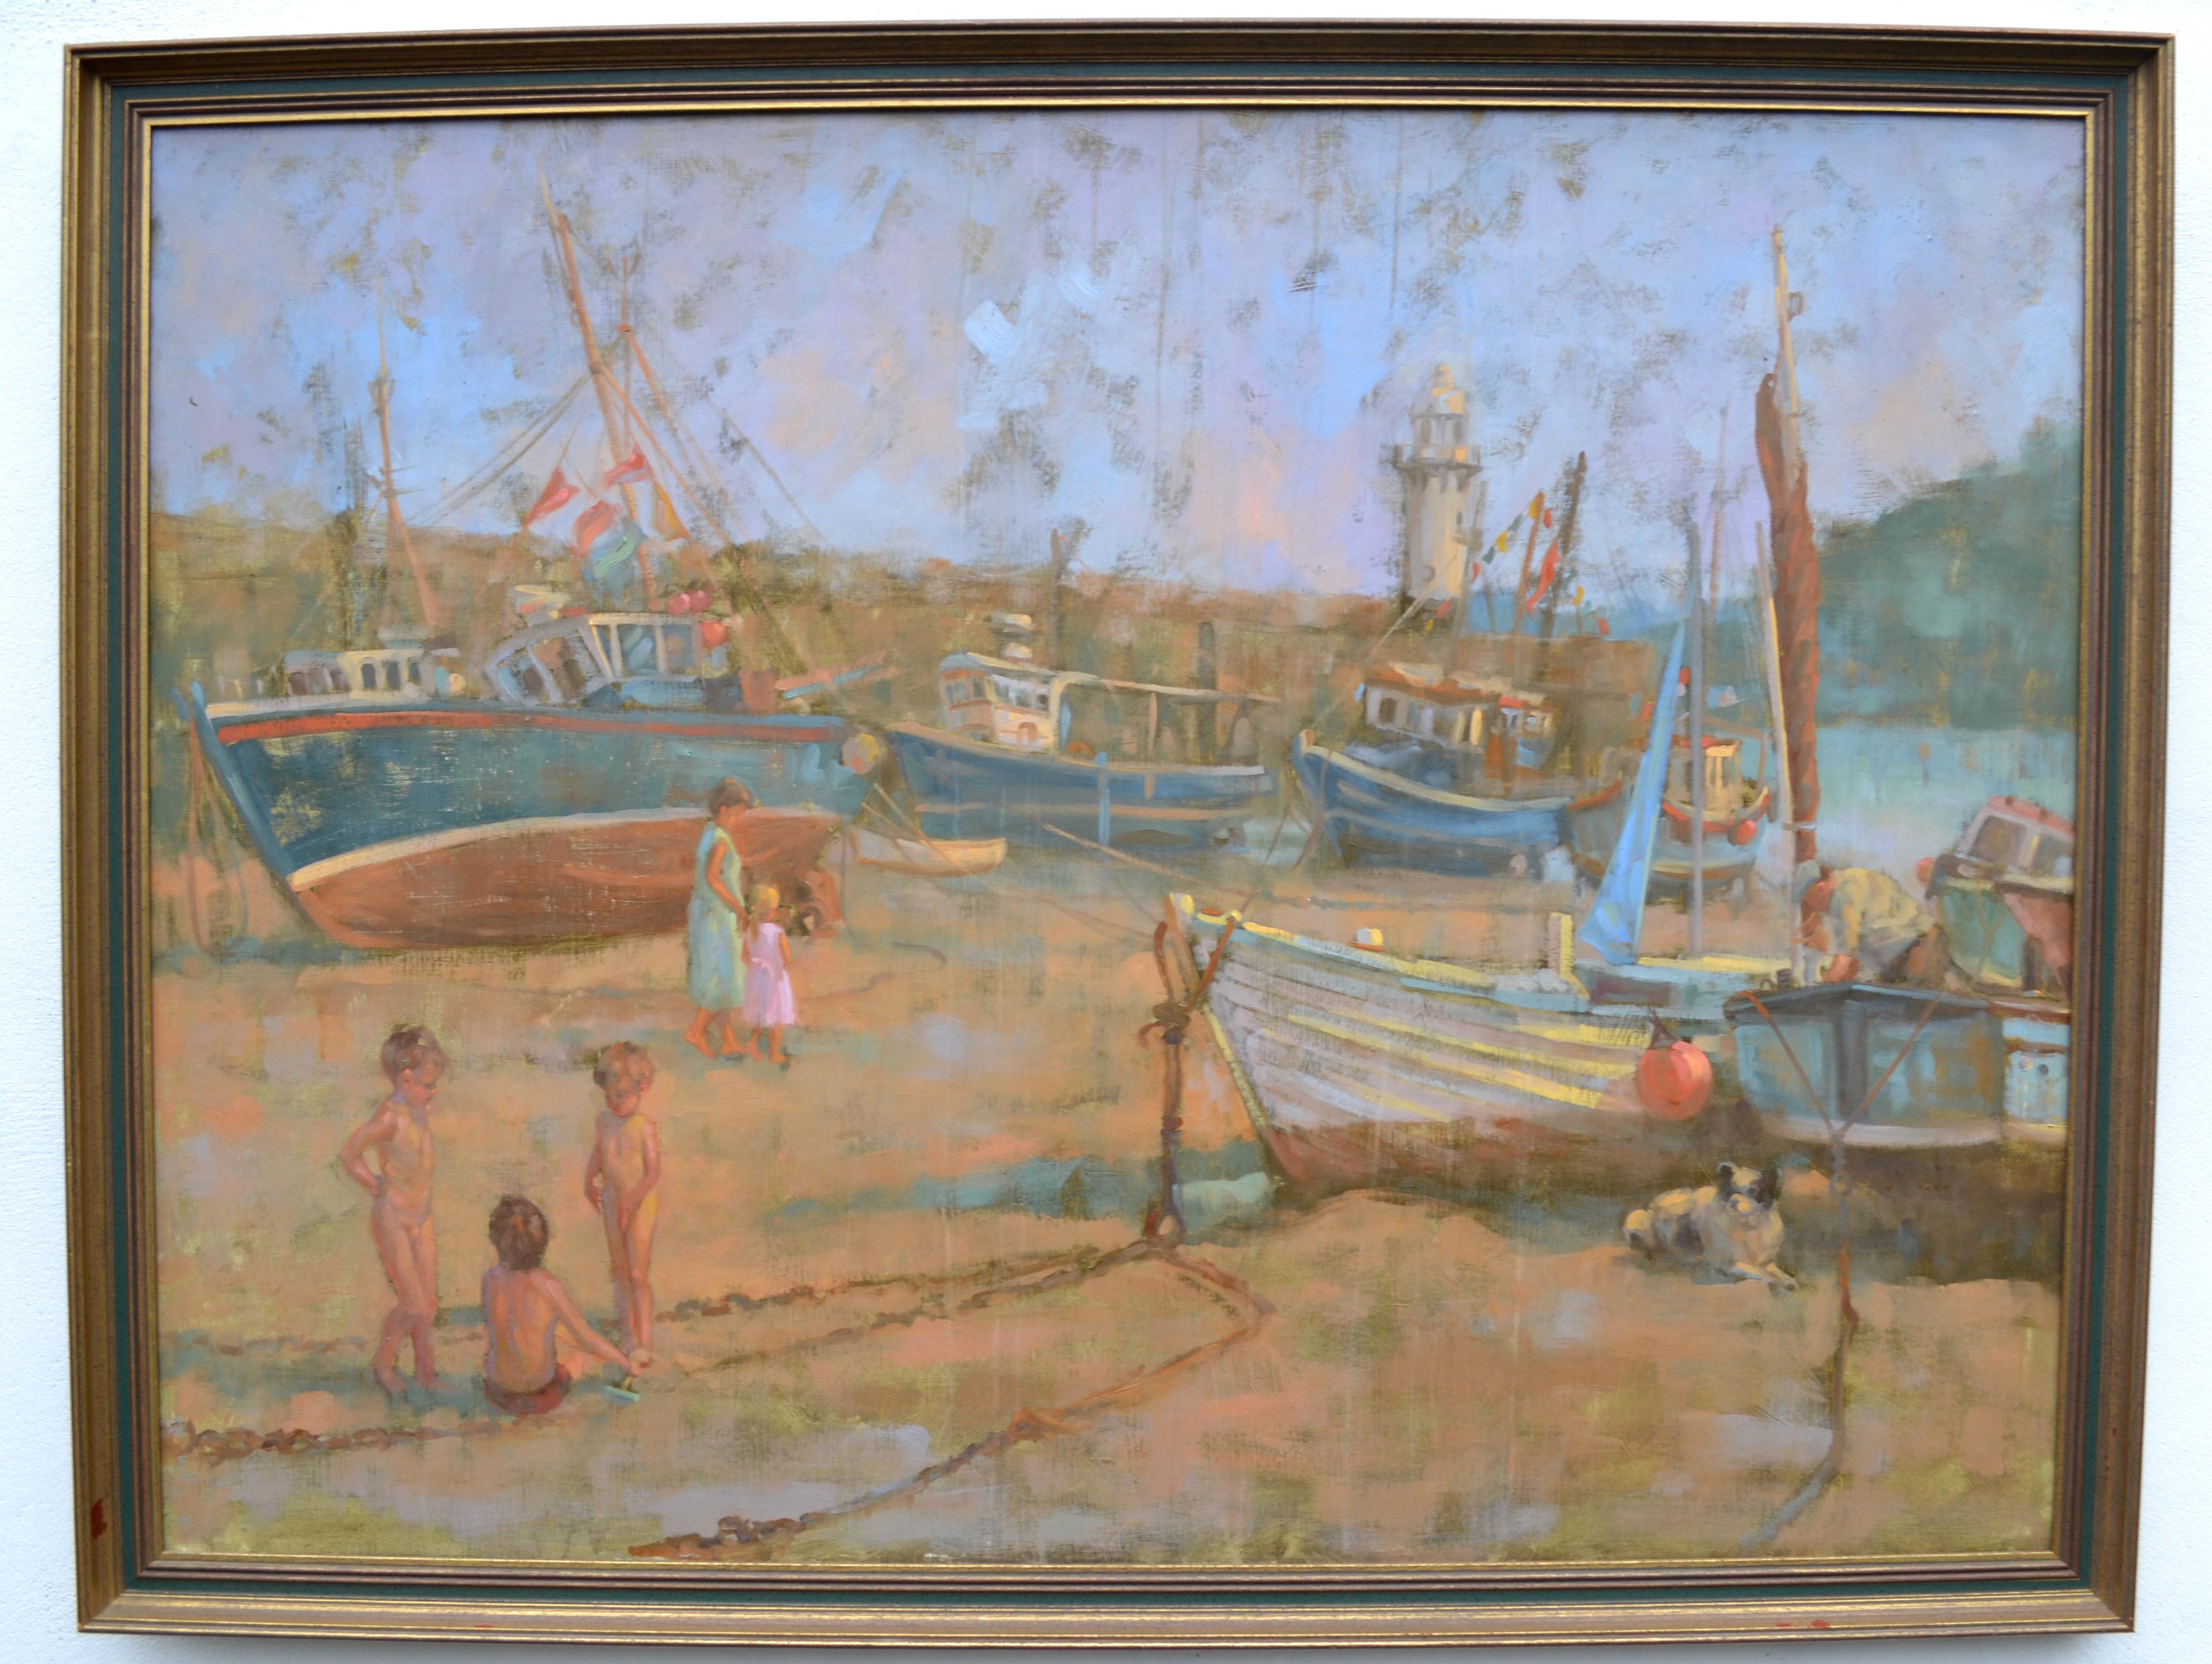 Typical Tiffin scene. Young children playing at the harbor St Ives, England, at low tide.

Framed 39